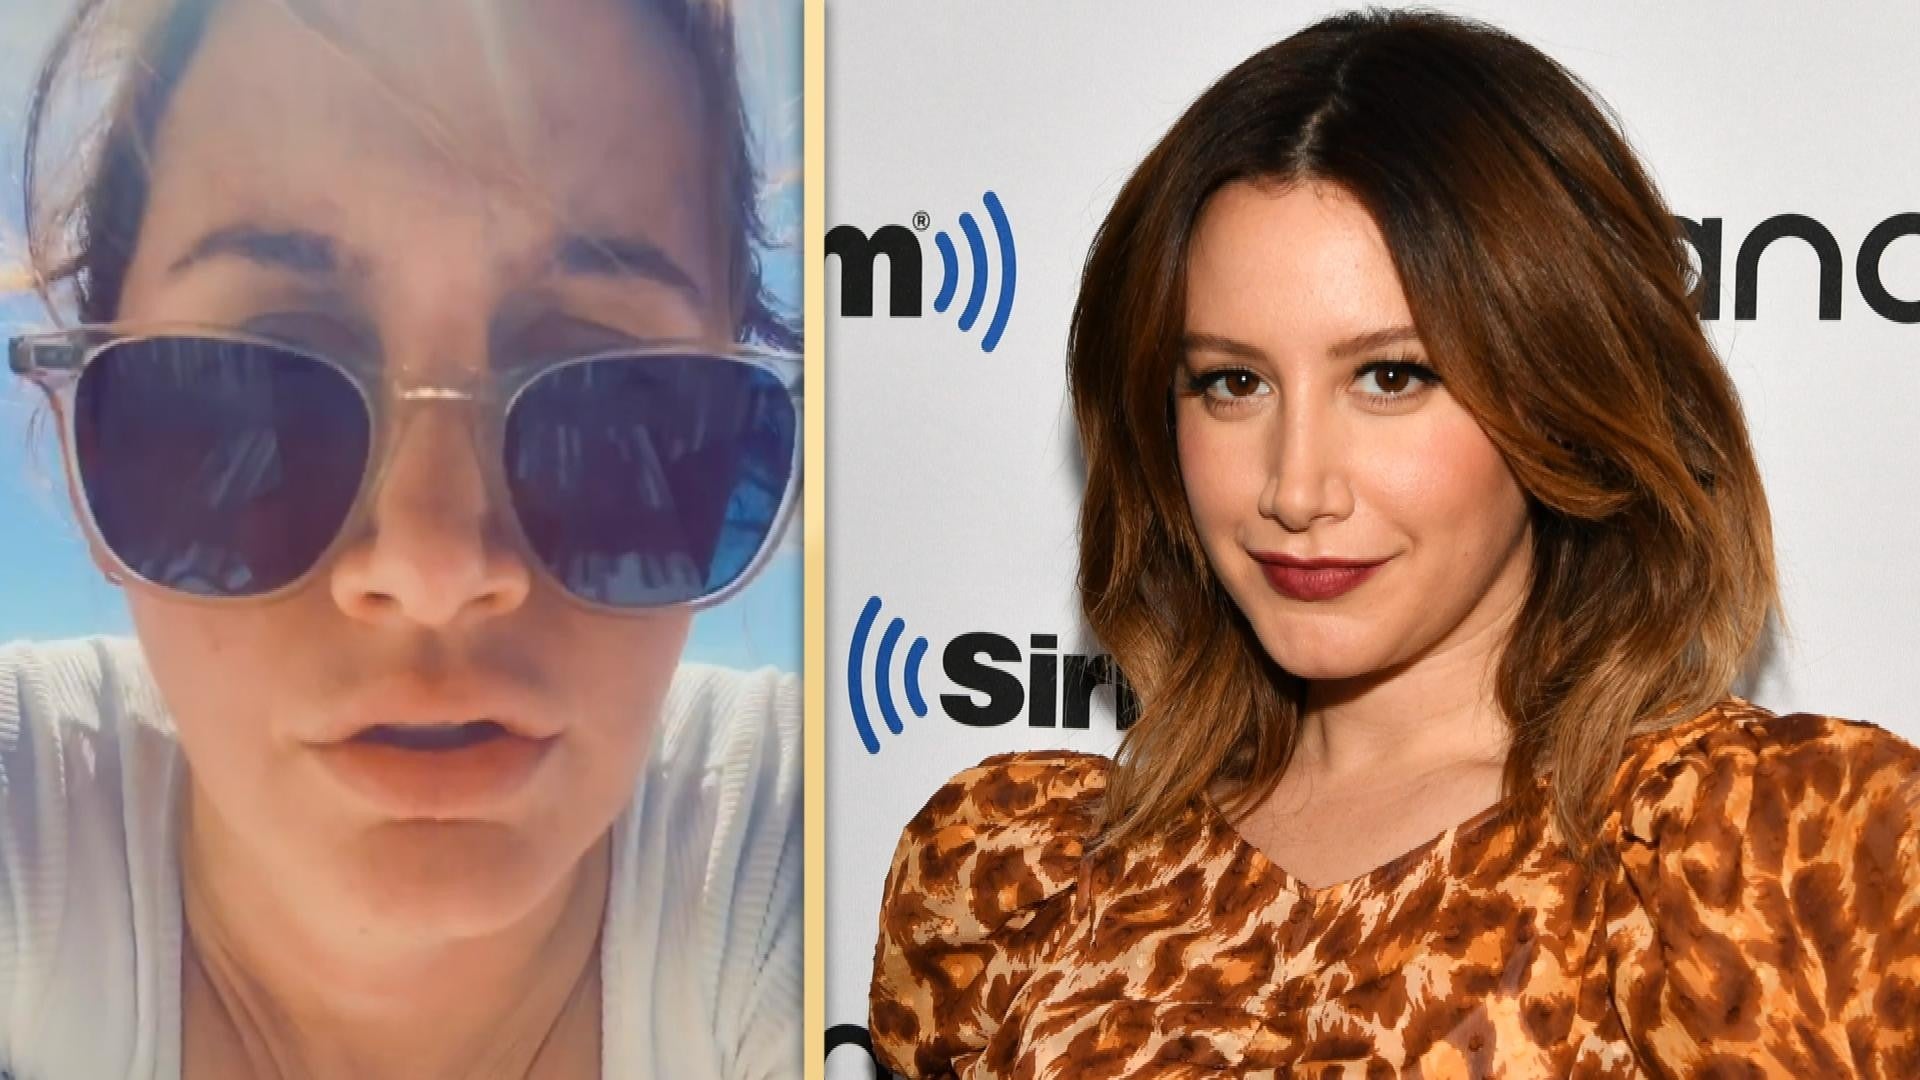 Ashley Tisdale and hubby take anniversary holiday